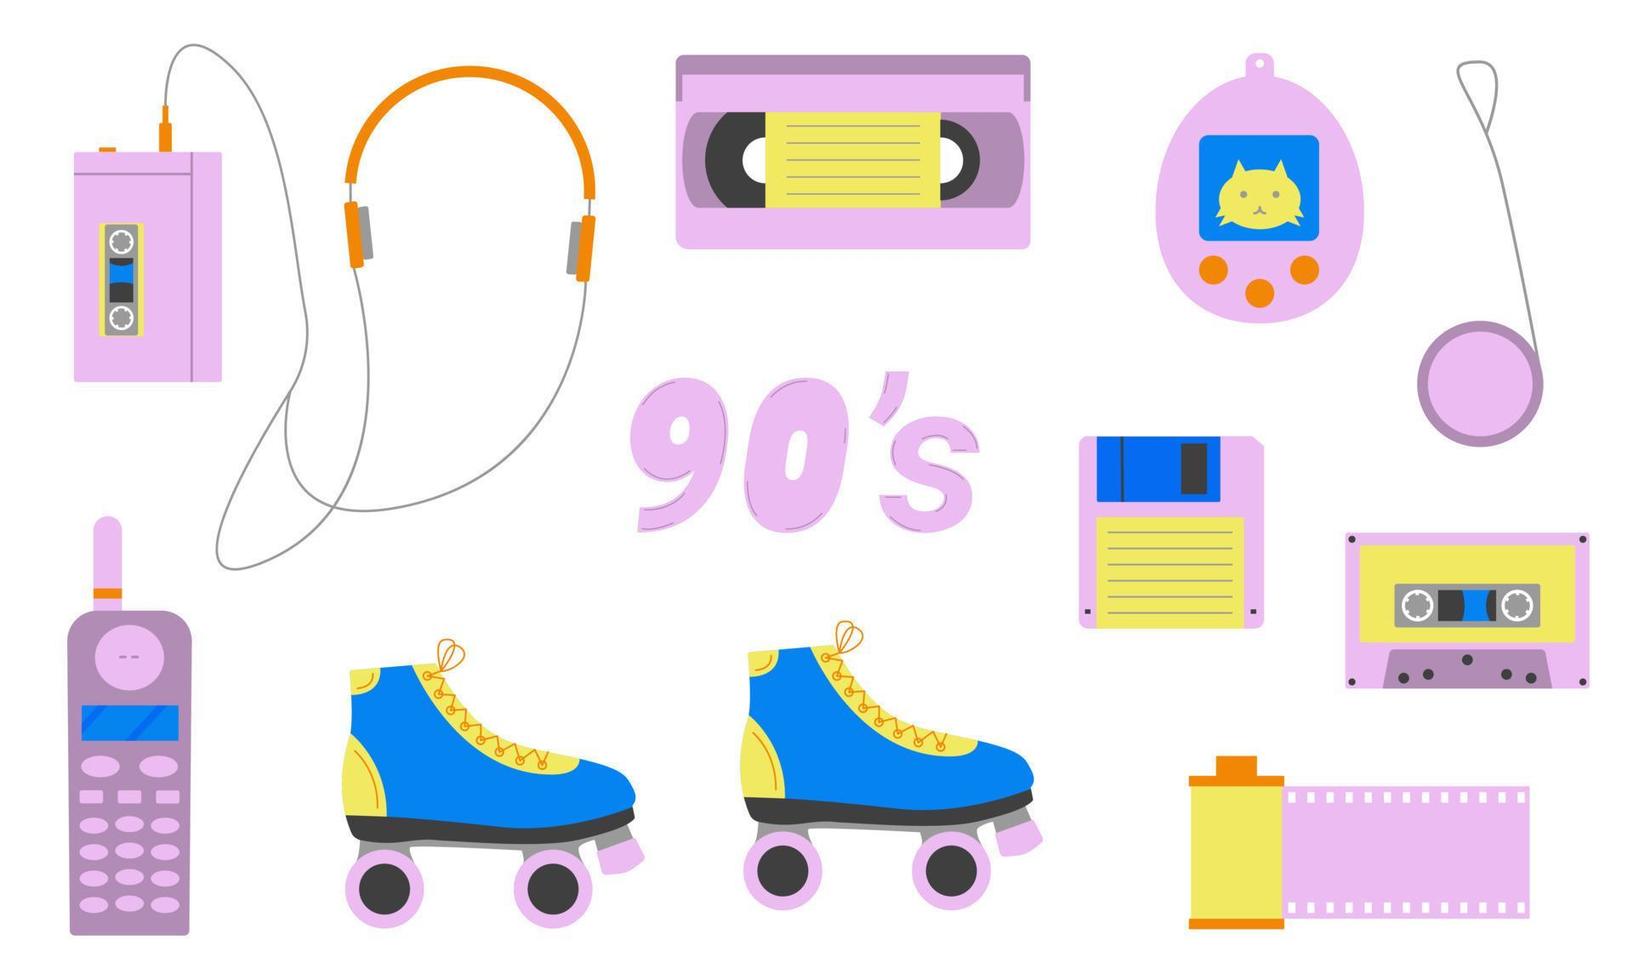 Set of elements of the 80s and 90s. Classic objects of the past decades. Flat style. Vector illustration